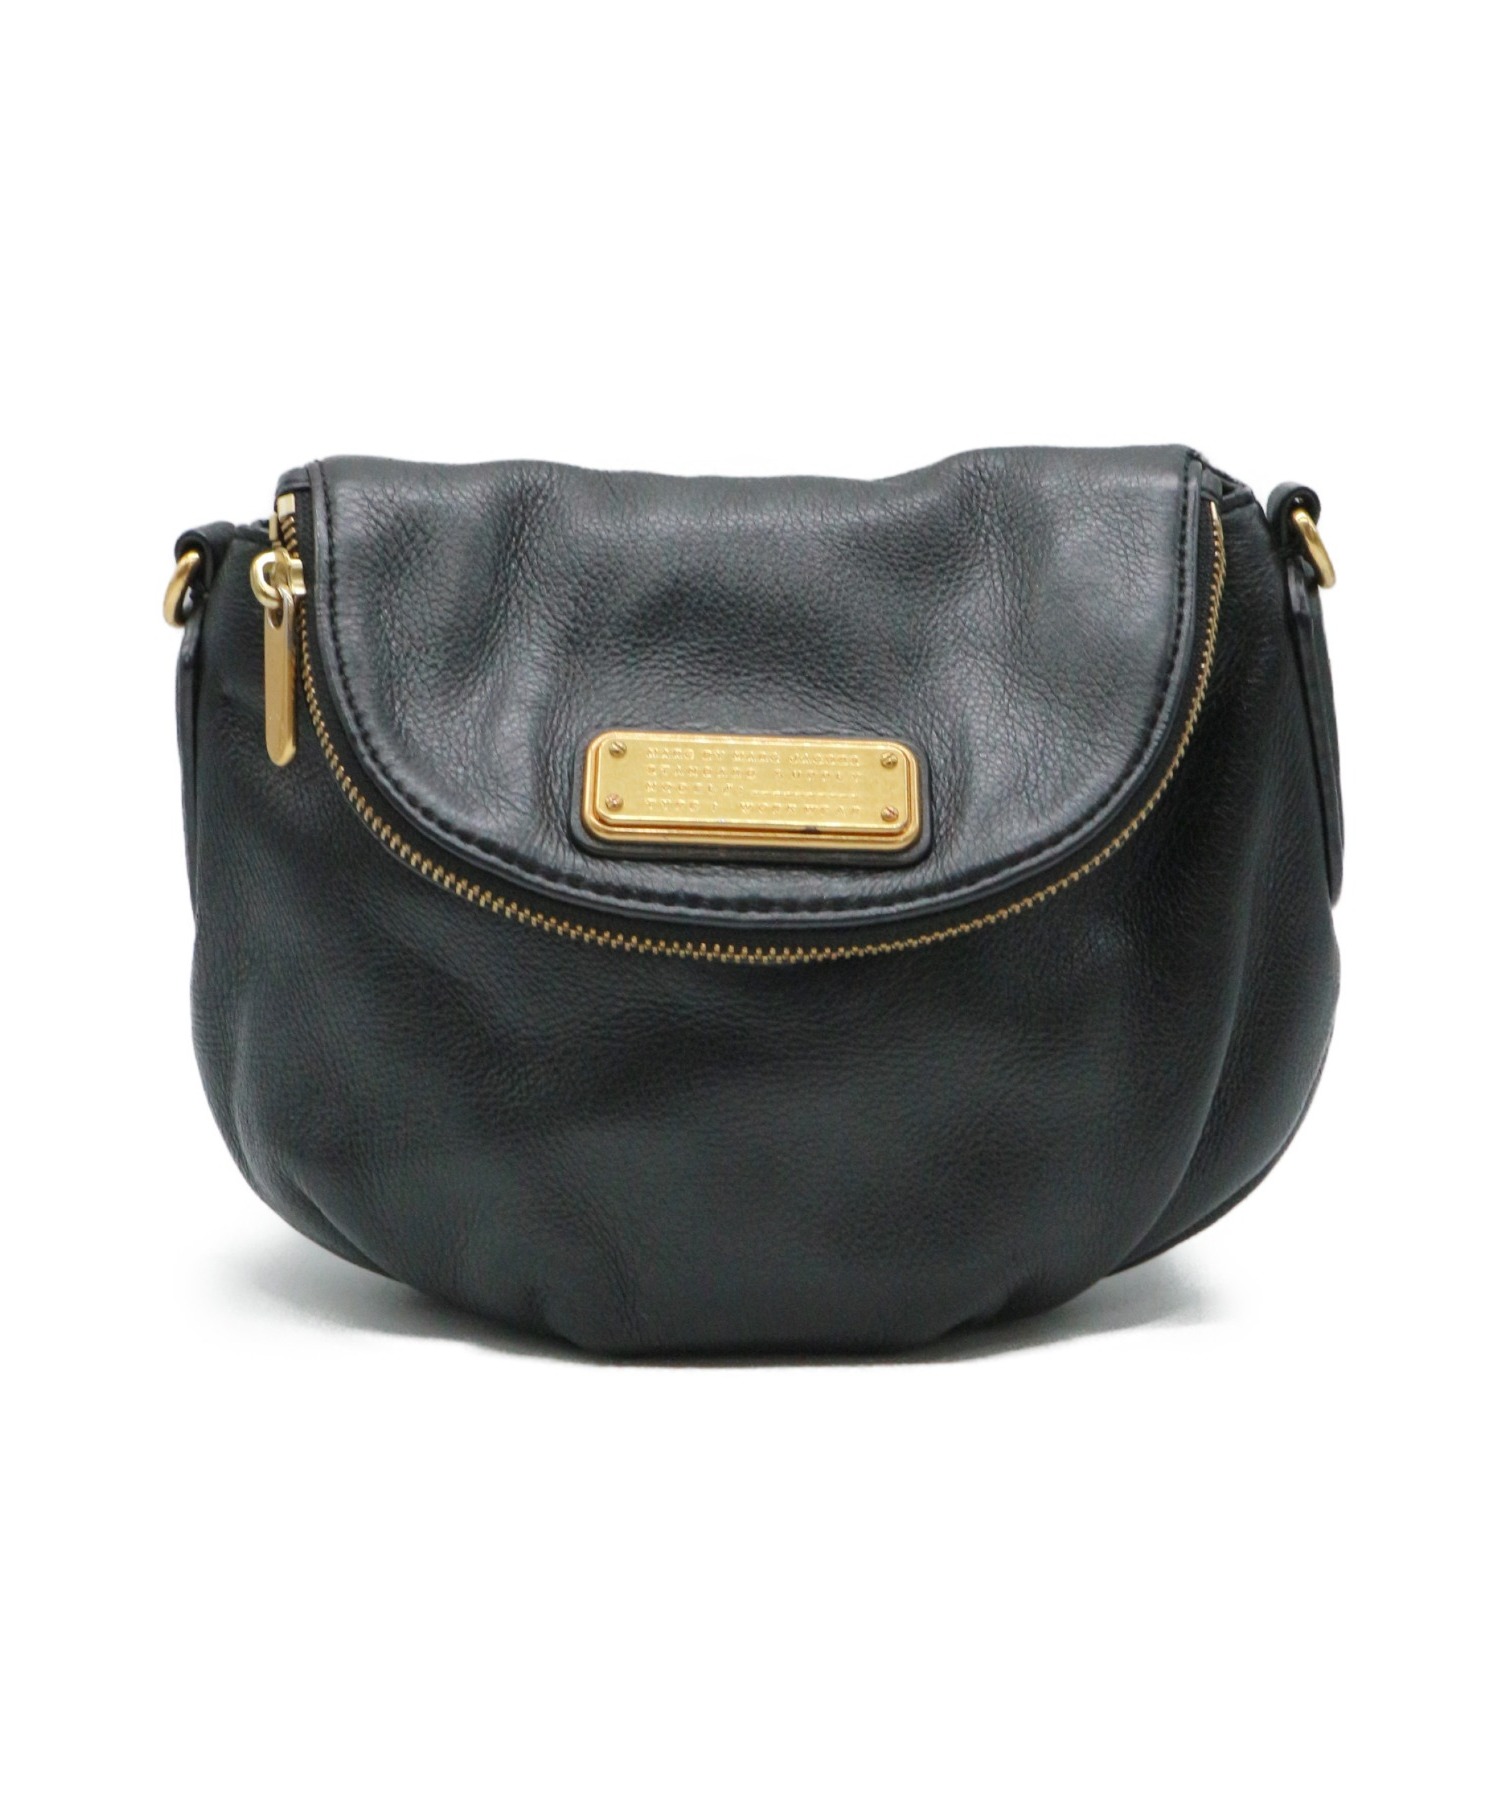 Y231204-18 MARC BY MARC JACOBS ショルダーバッグINFO - ショルダーバッグ